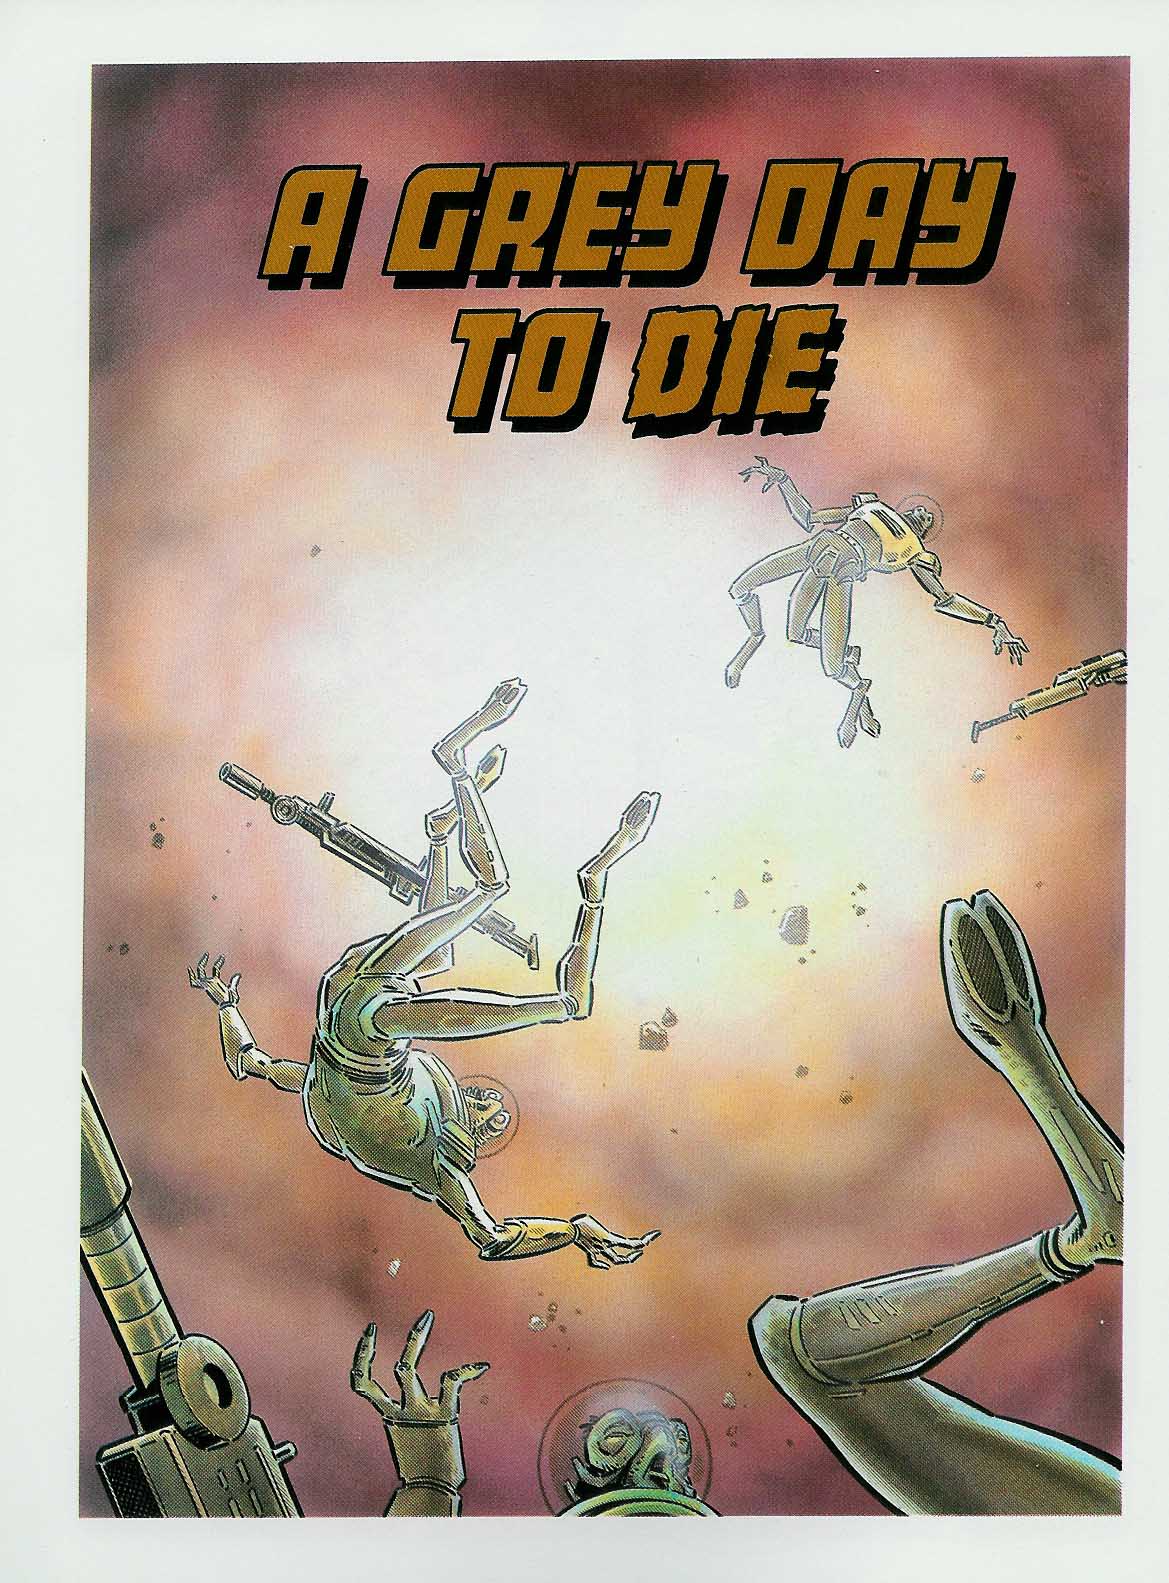 Read online Marvel Graphic Novel comic -  Issue #25 - The Alien Legion - A Grey Day to Die - 9